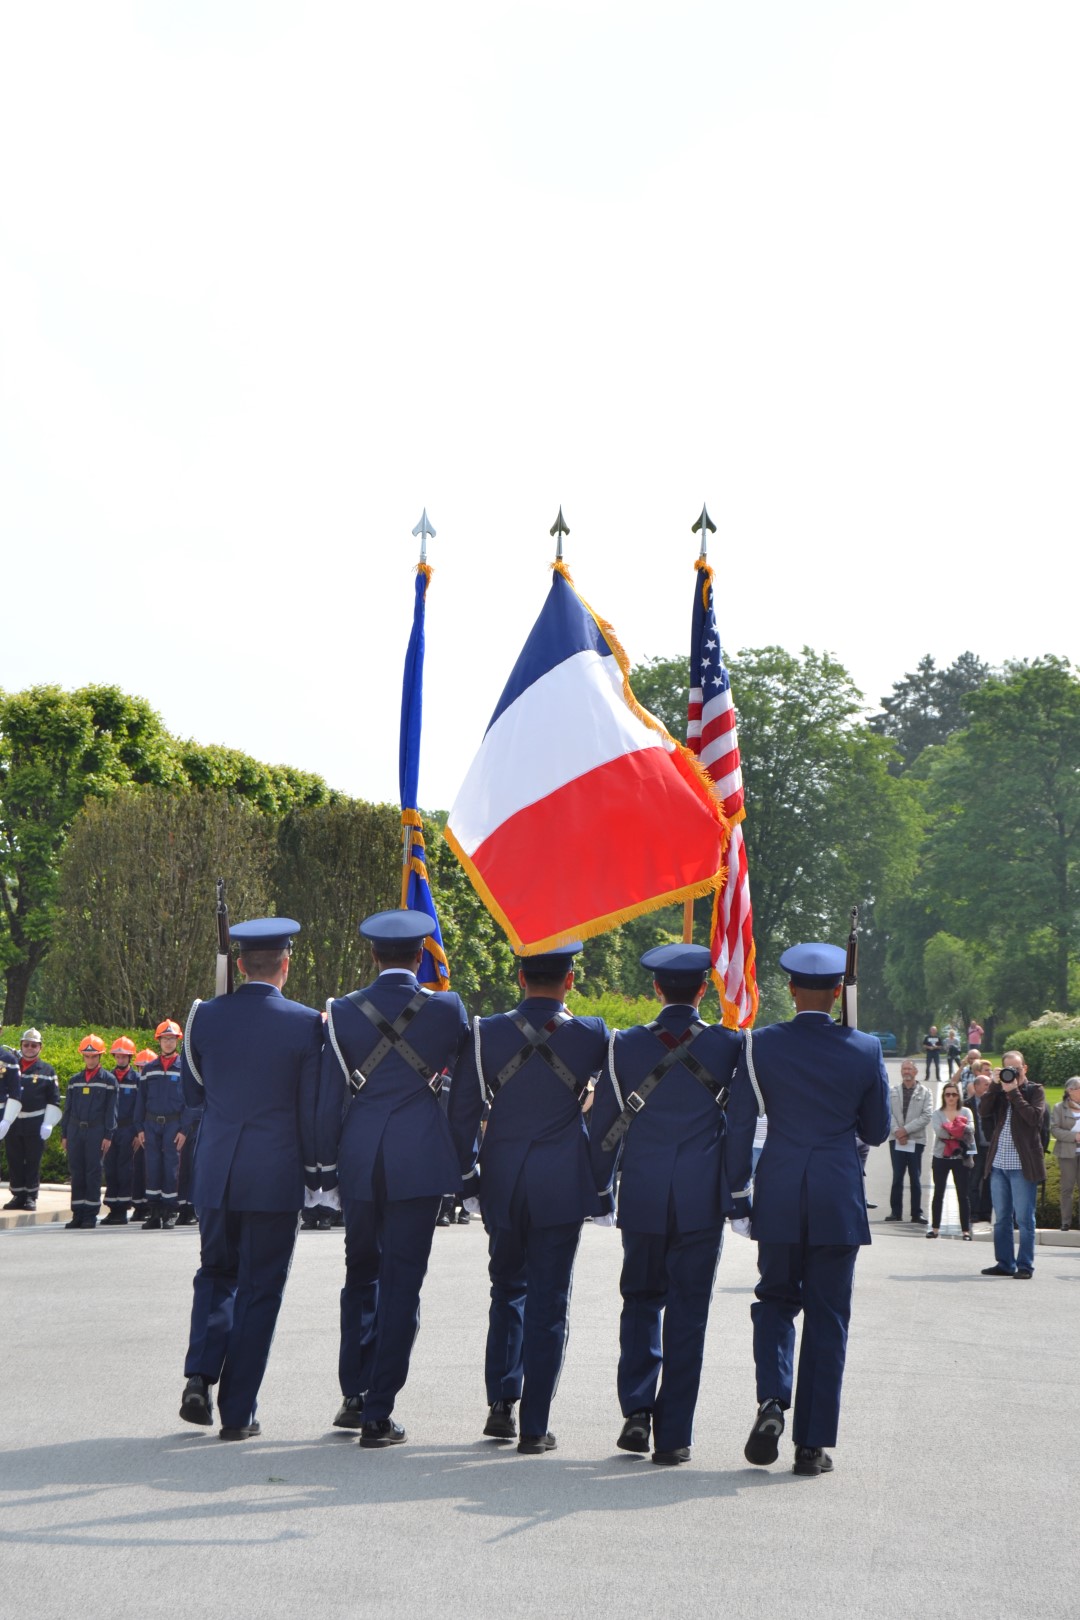 Memorial Day Cerememondy at the Meuse-Argonne American Cemetery and Memorial in France